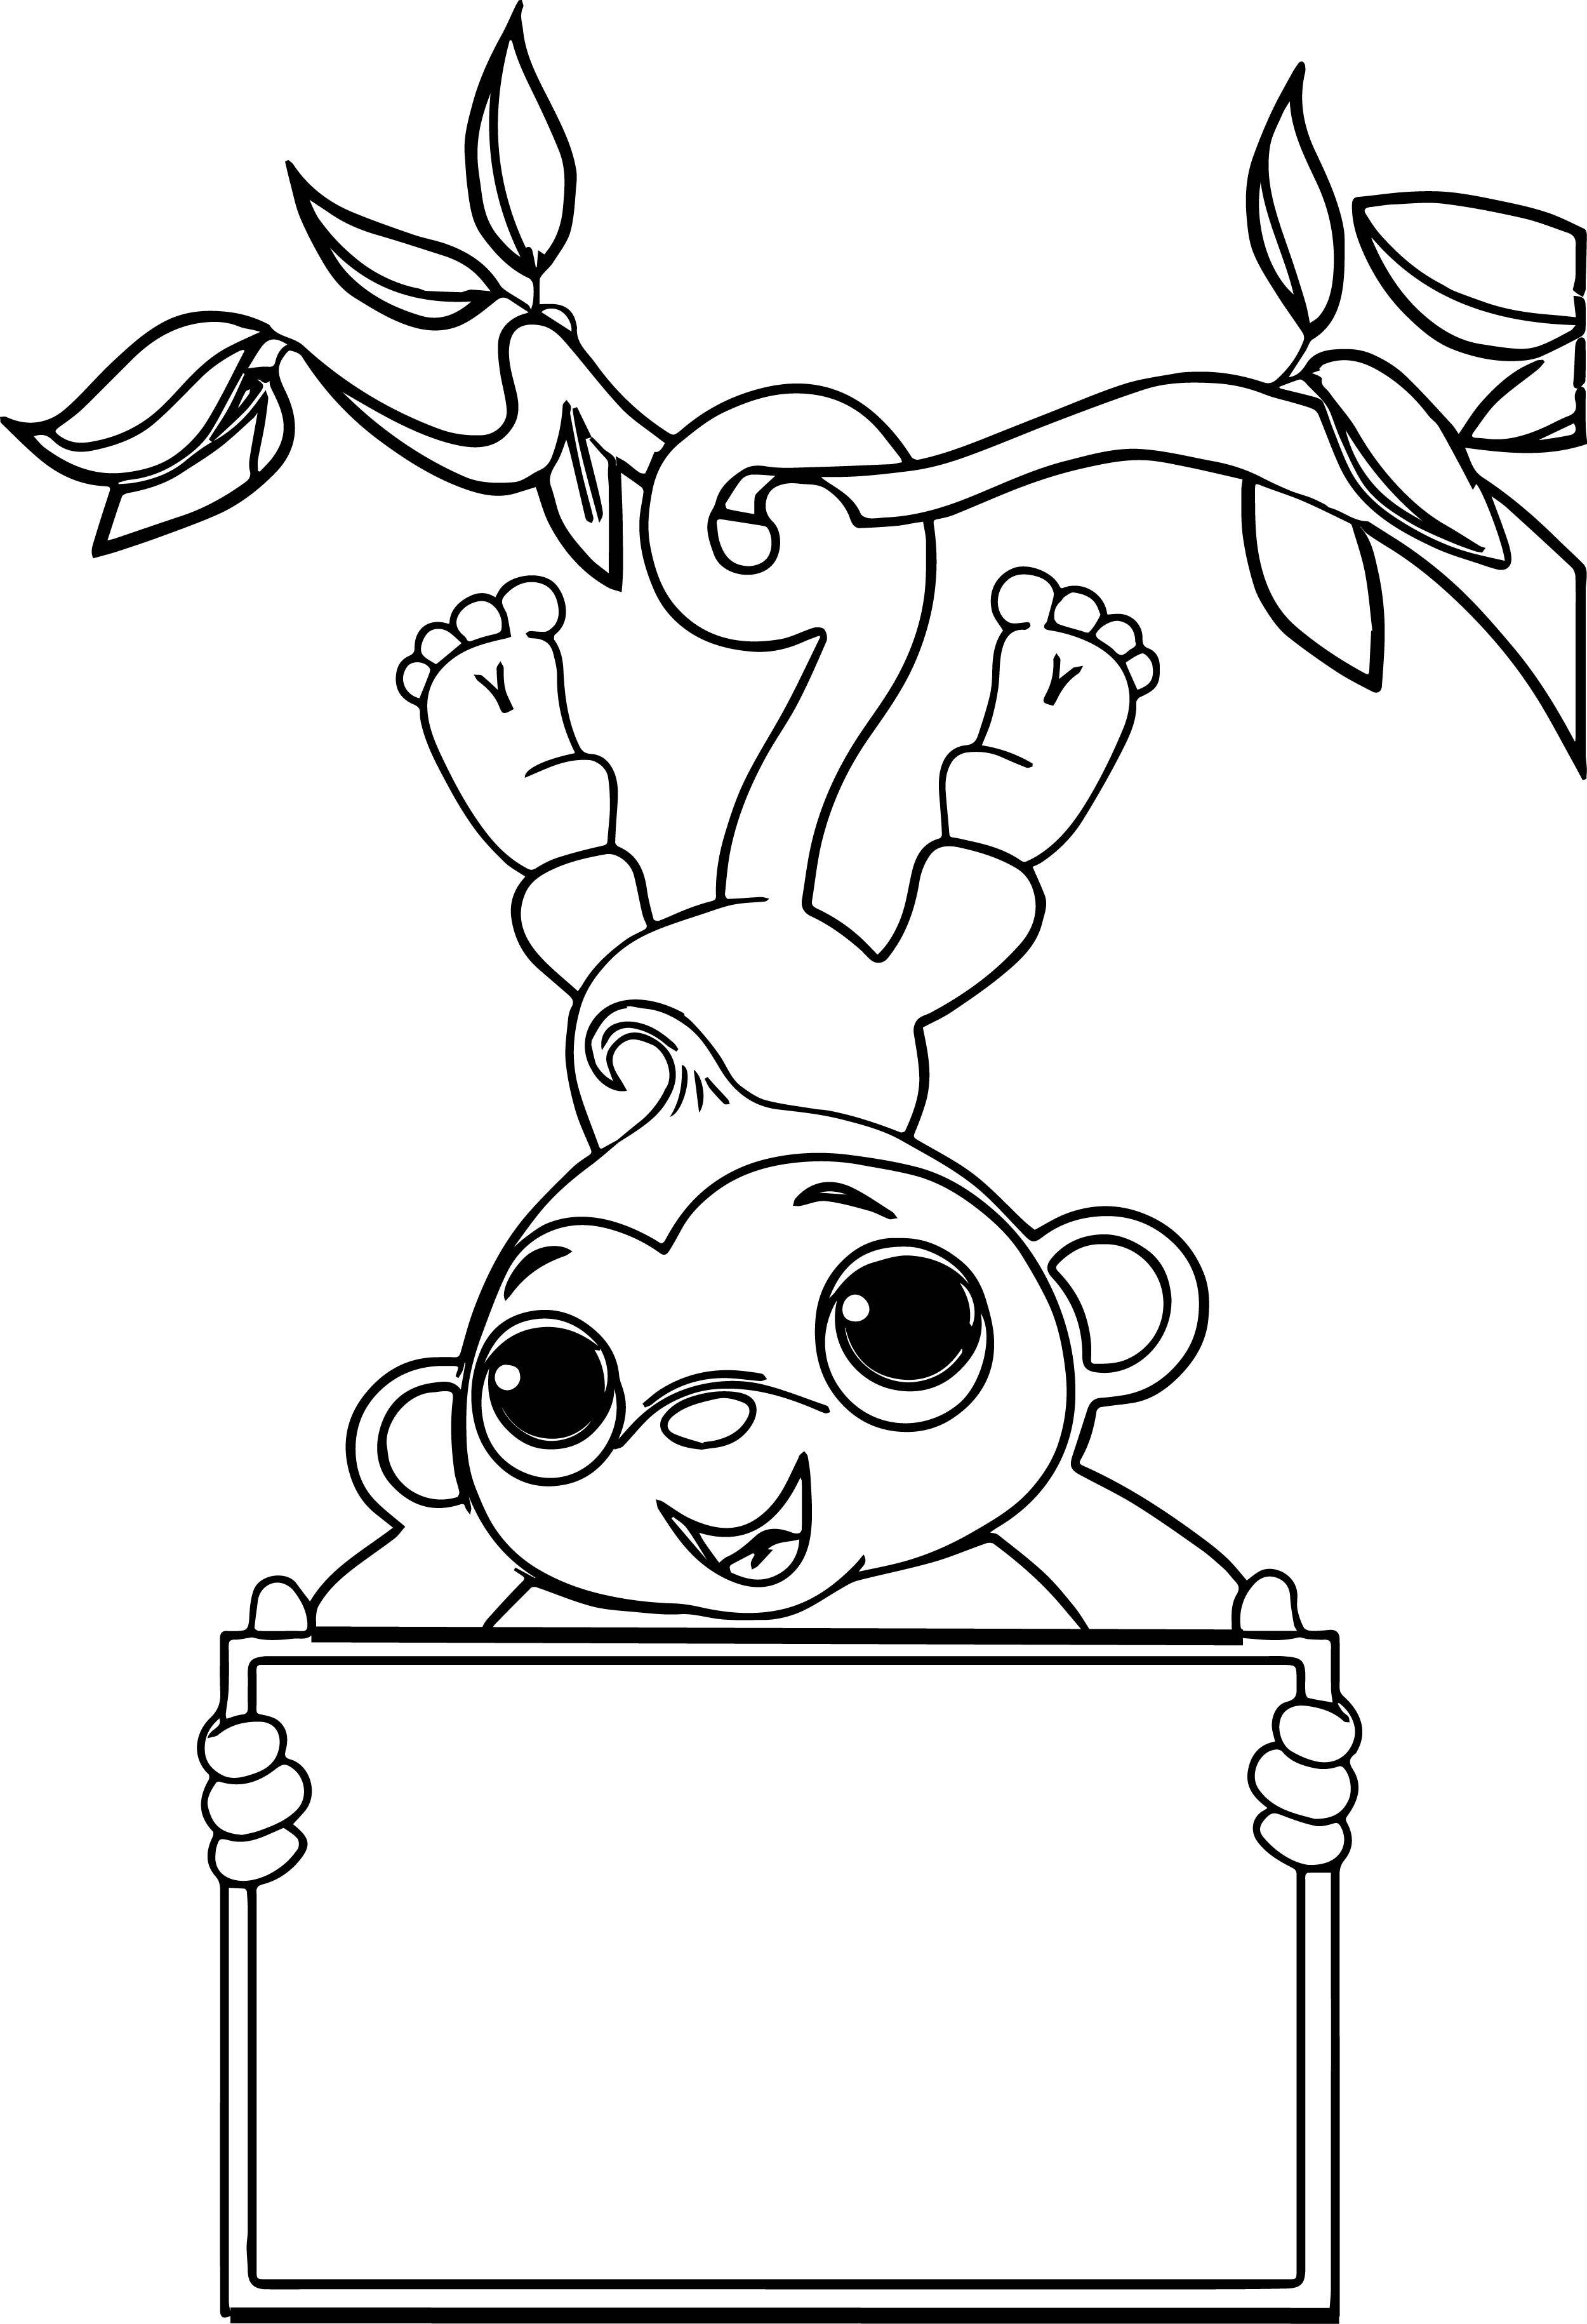 Baby Monkey Coloring Pages
 Cute Baby Monkey Coloring Pages